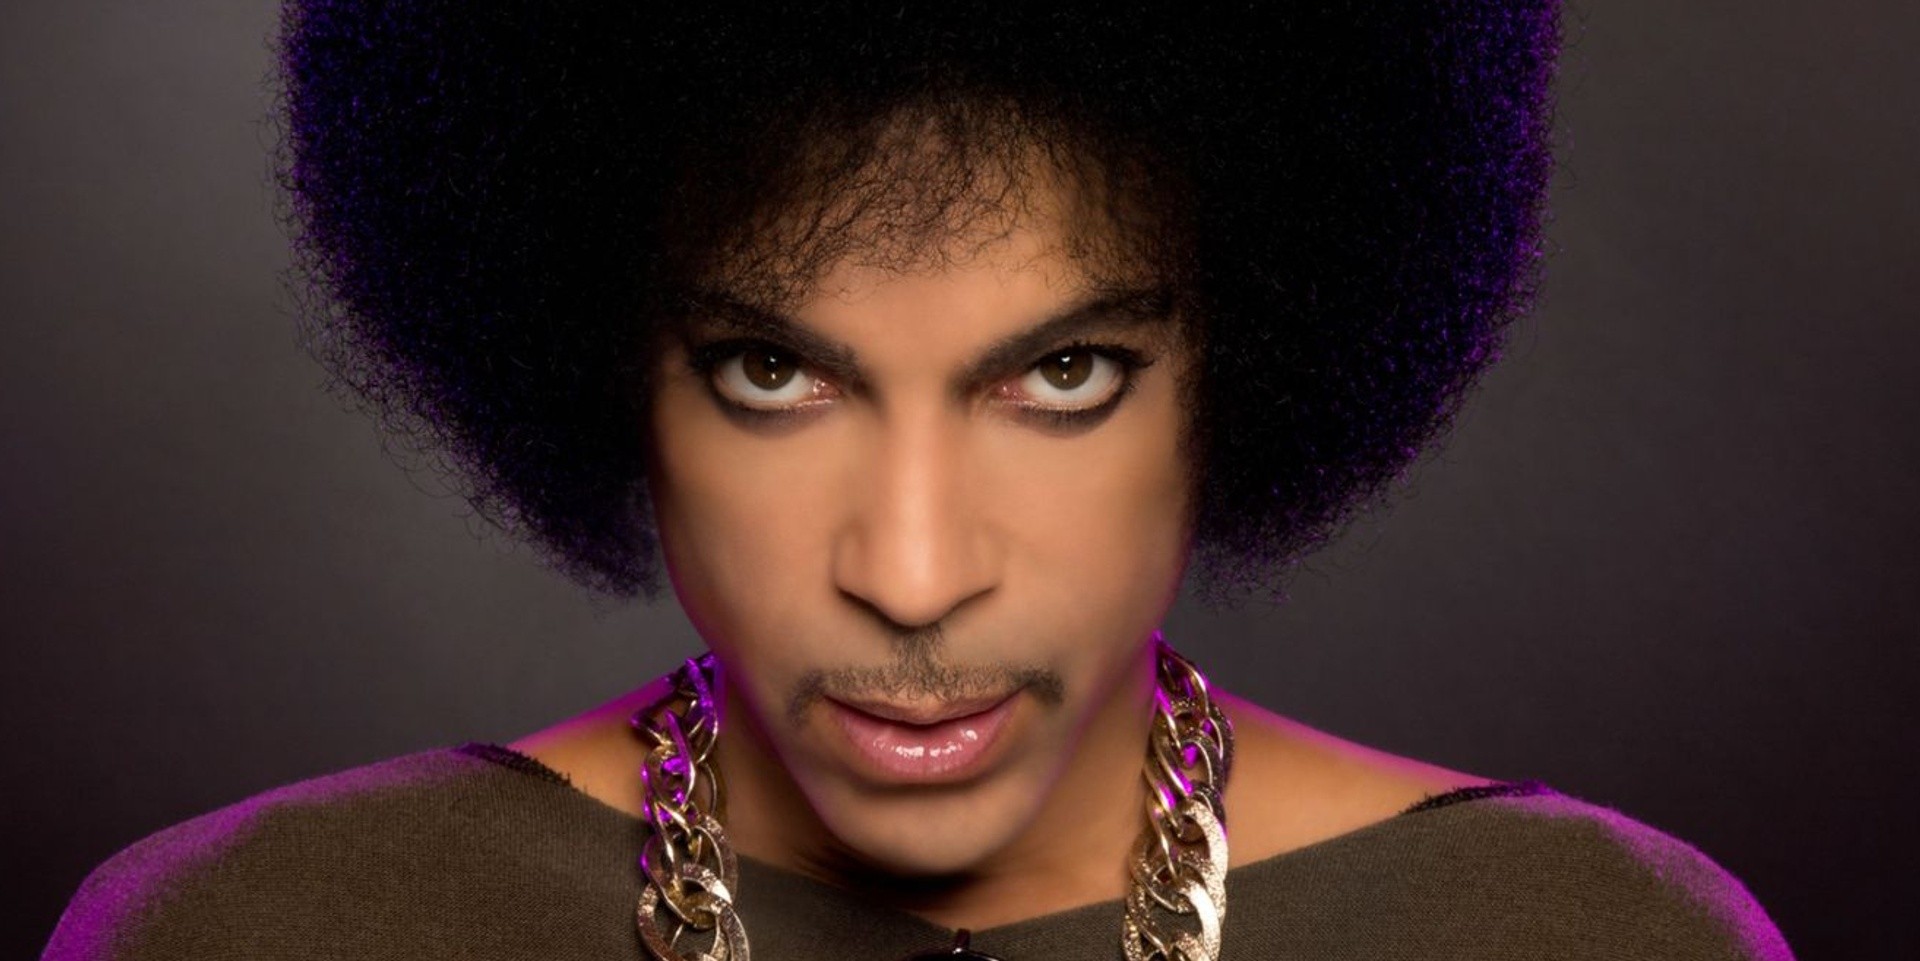 BREAKING: Prince has been found dead